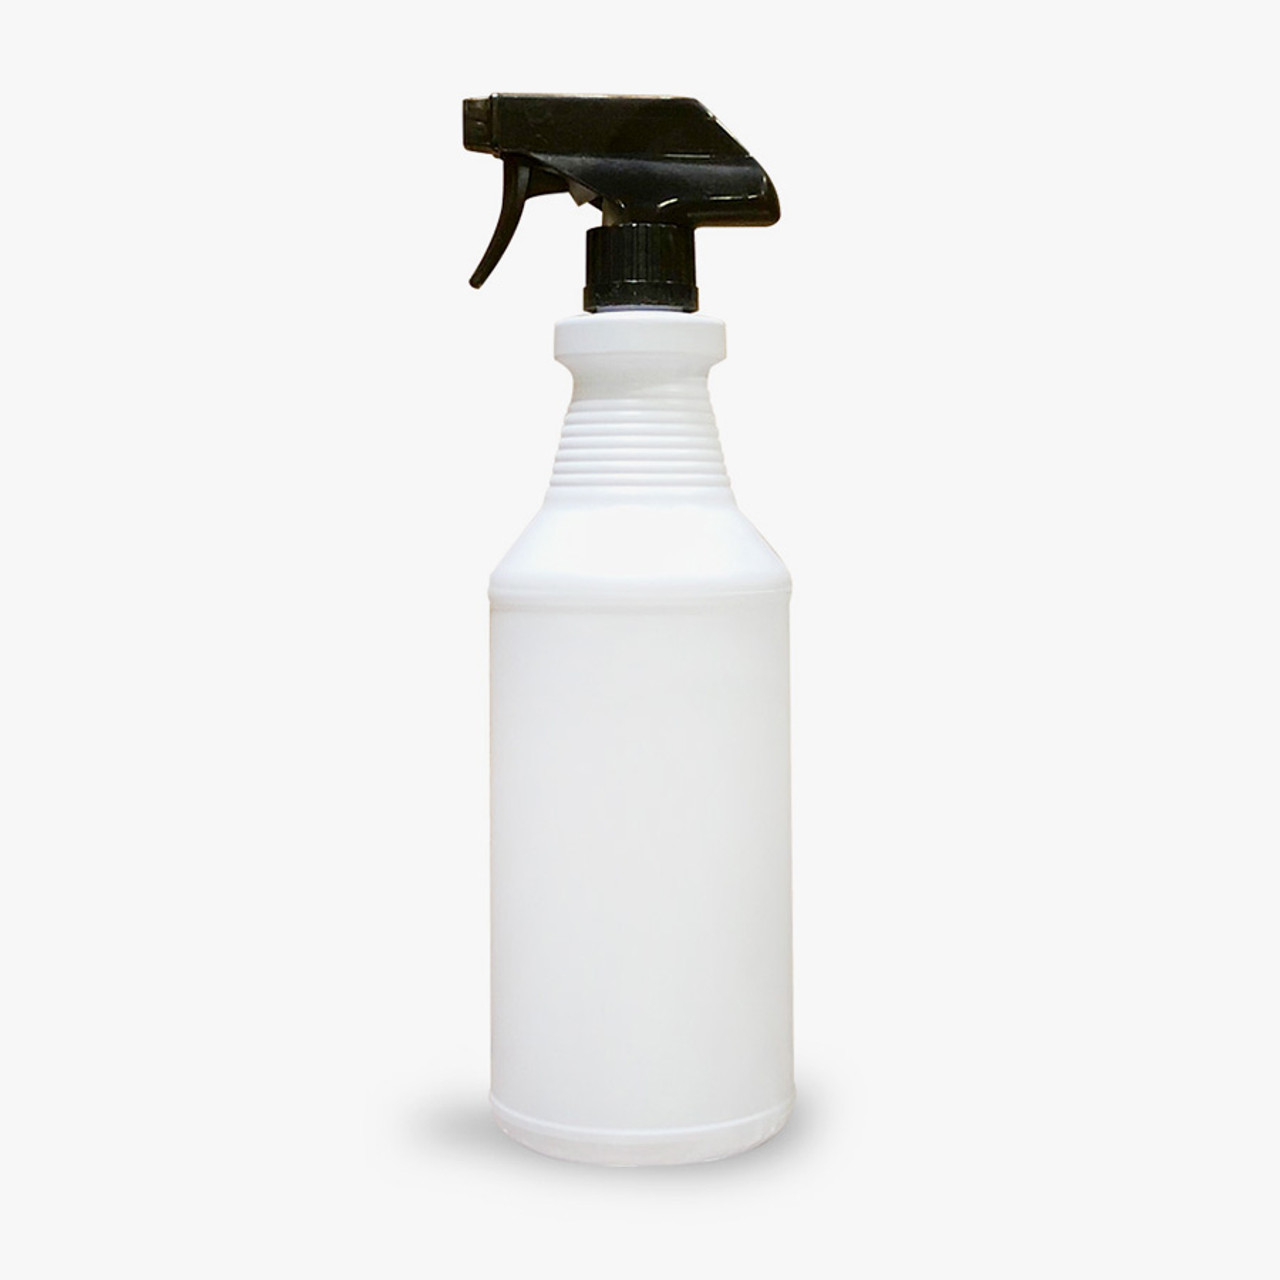 Spray Bottles for Cleaning Products